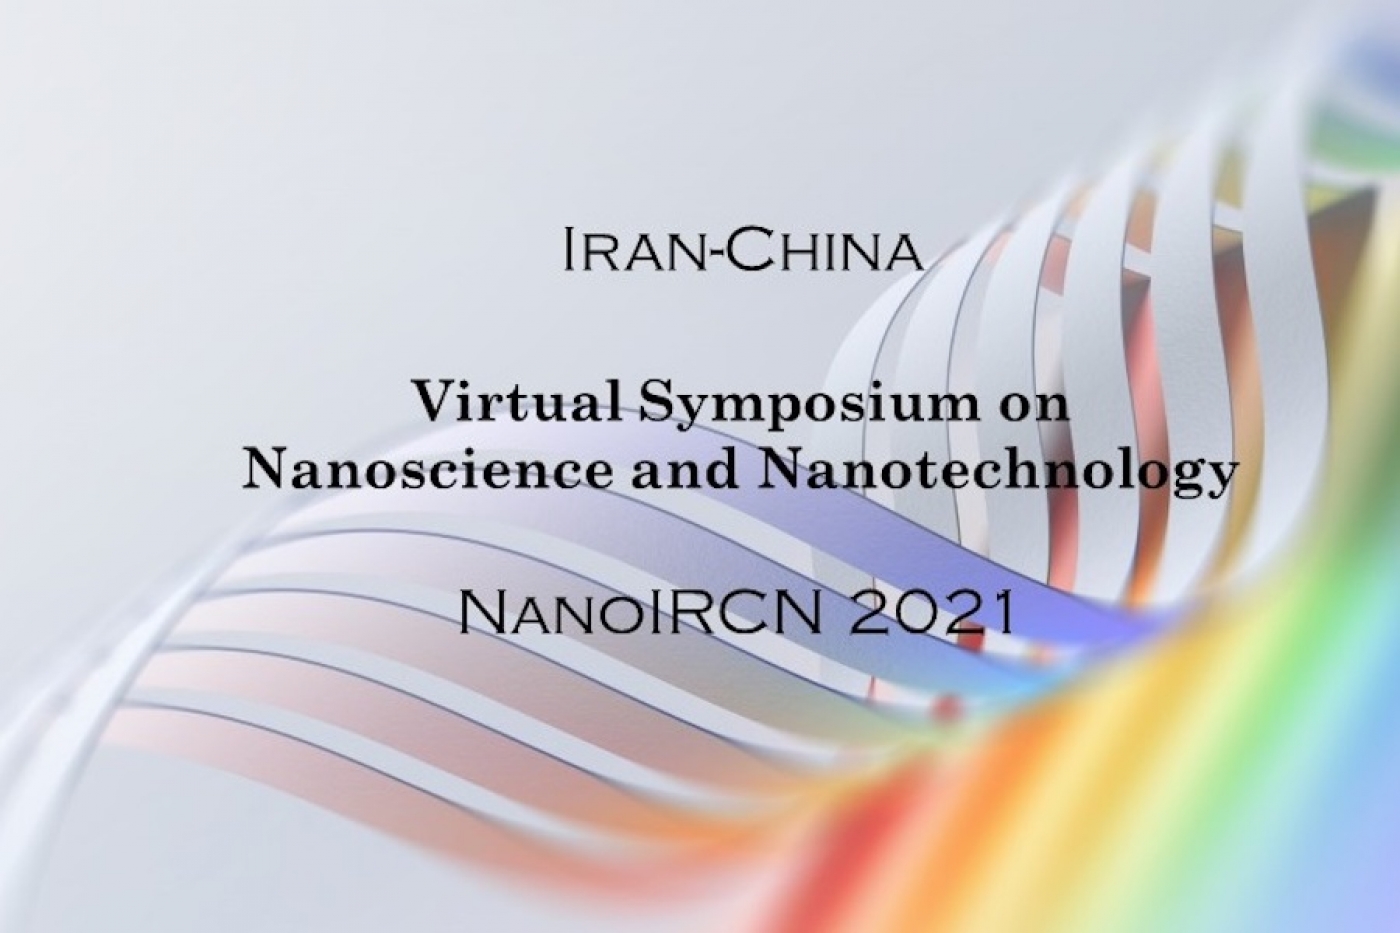 Virtual Symposium on Nanoscience and Nanotechnology – March 3rd and 4th 2021